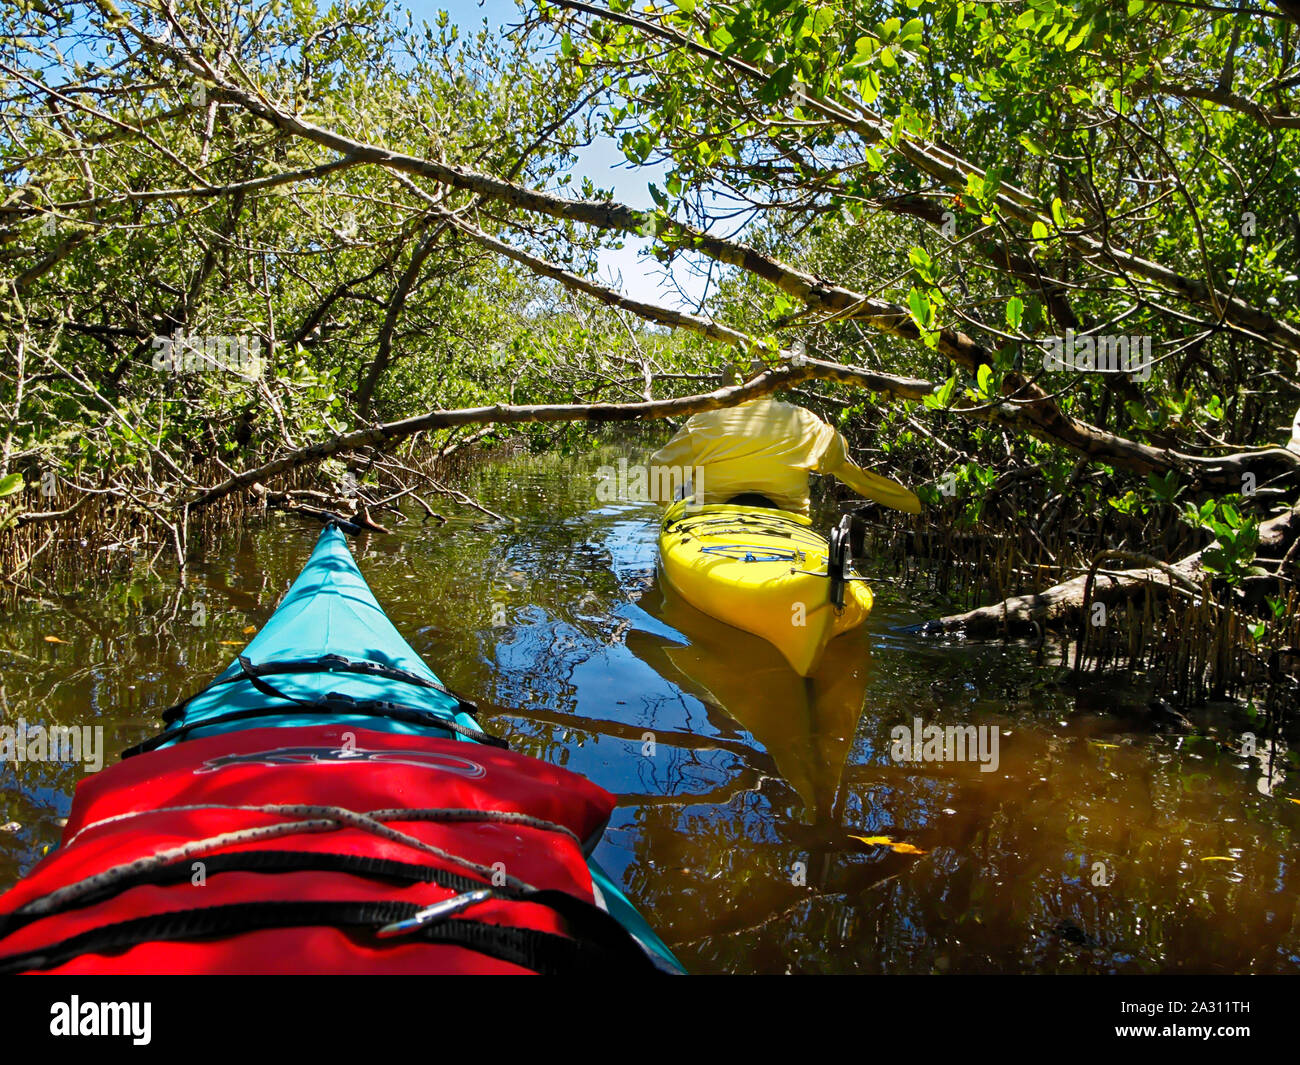 2 kayaks; mangrove creek; ducking under branch; tight squeeze; challenging paddle, reflections; shallow water; recreation; nature; boating; Gasparilla Stock Photo